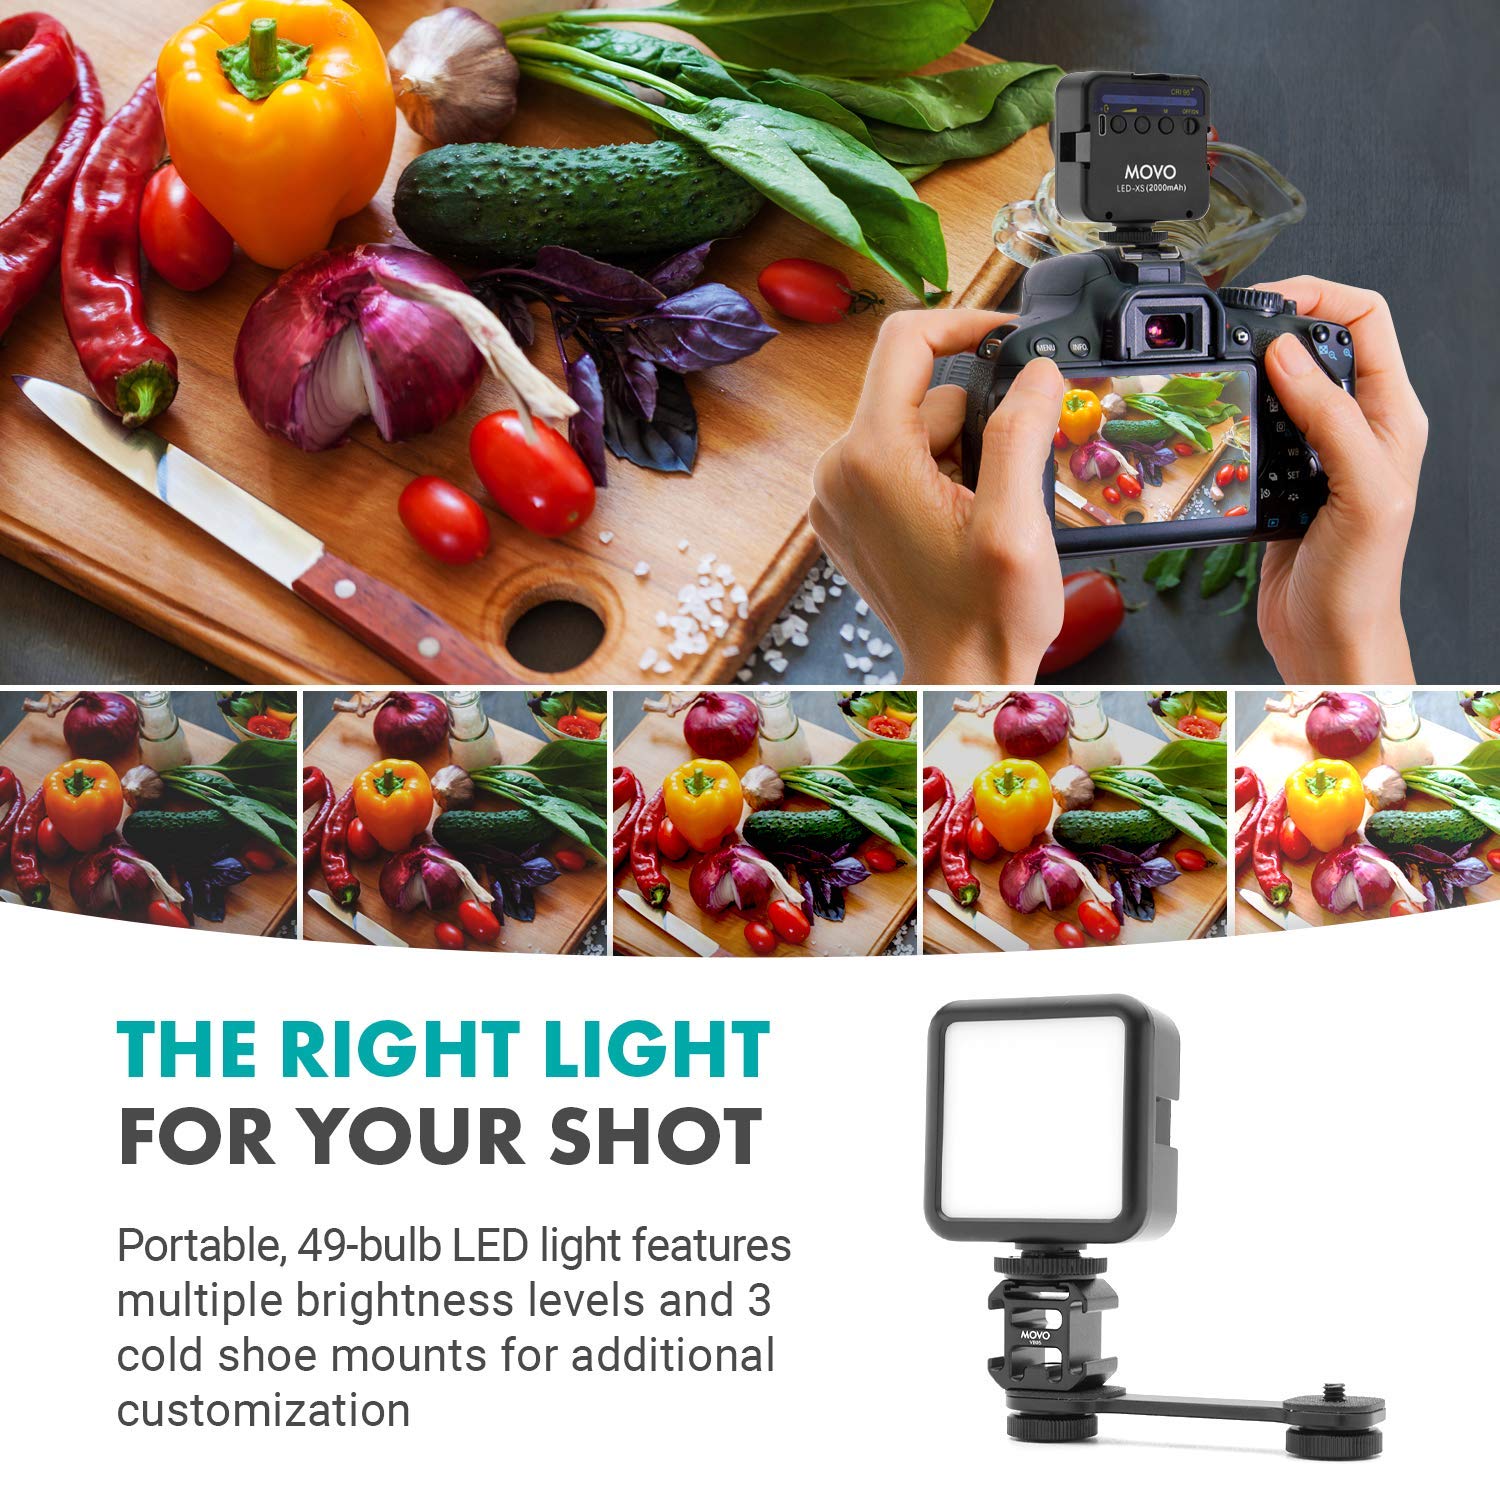 Movo iVlog3 Smartphone Video Bundle with Movo VXR10-PRO Directional Microphone, Mini Tripod, LED Camera Light, Wide-Angle Lens - Cell Phone Tripod Stand - External Microphone for iPhone and Android  - Very Good